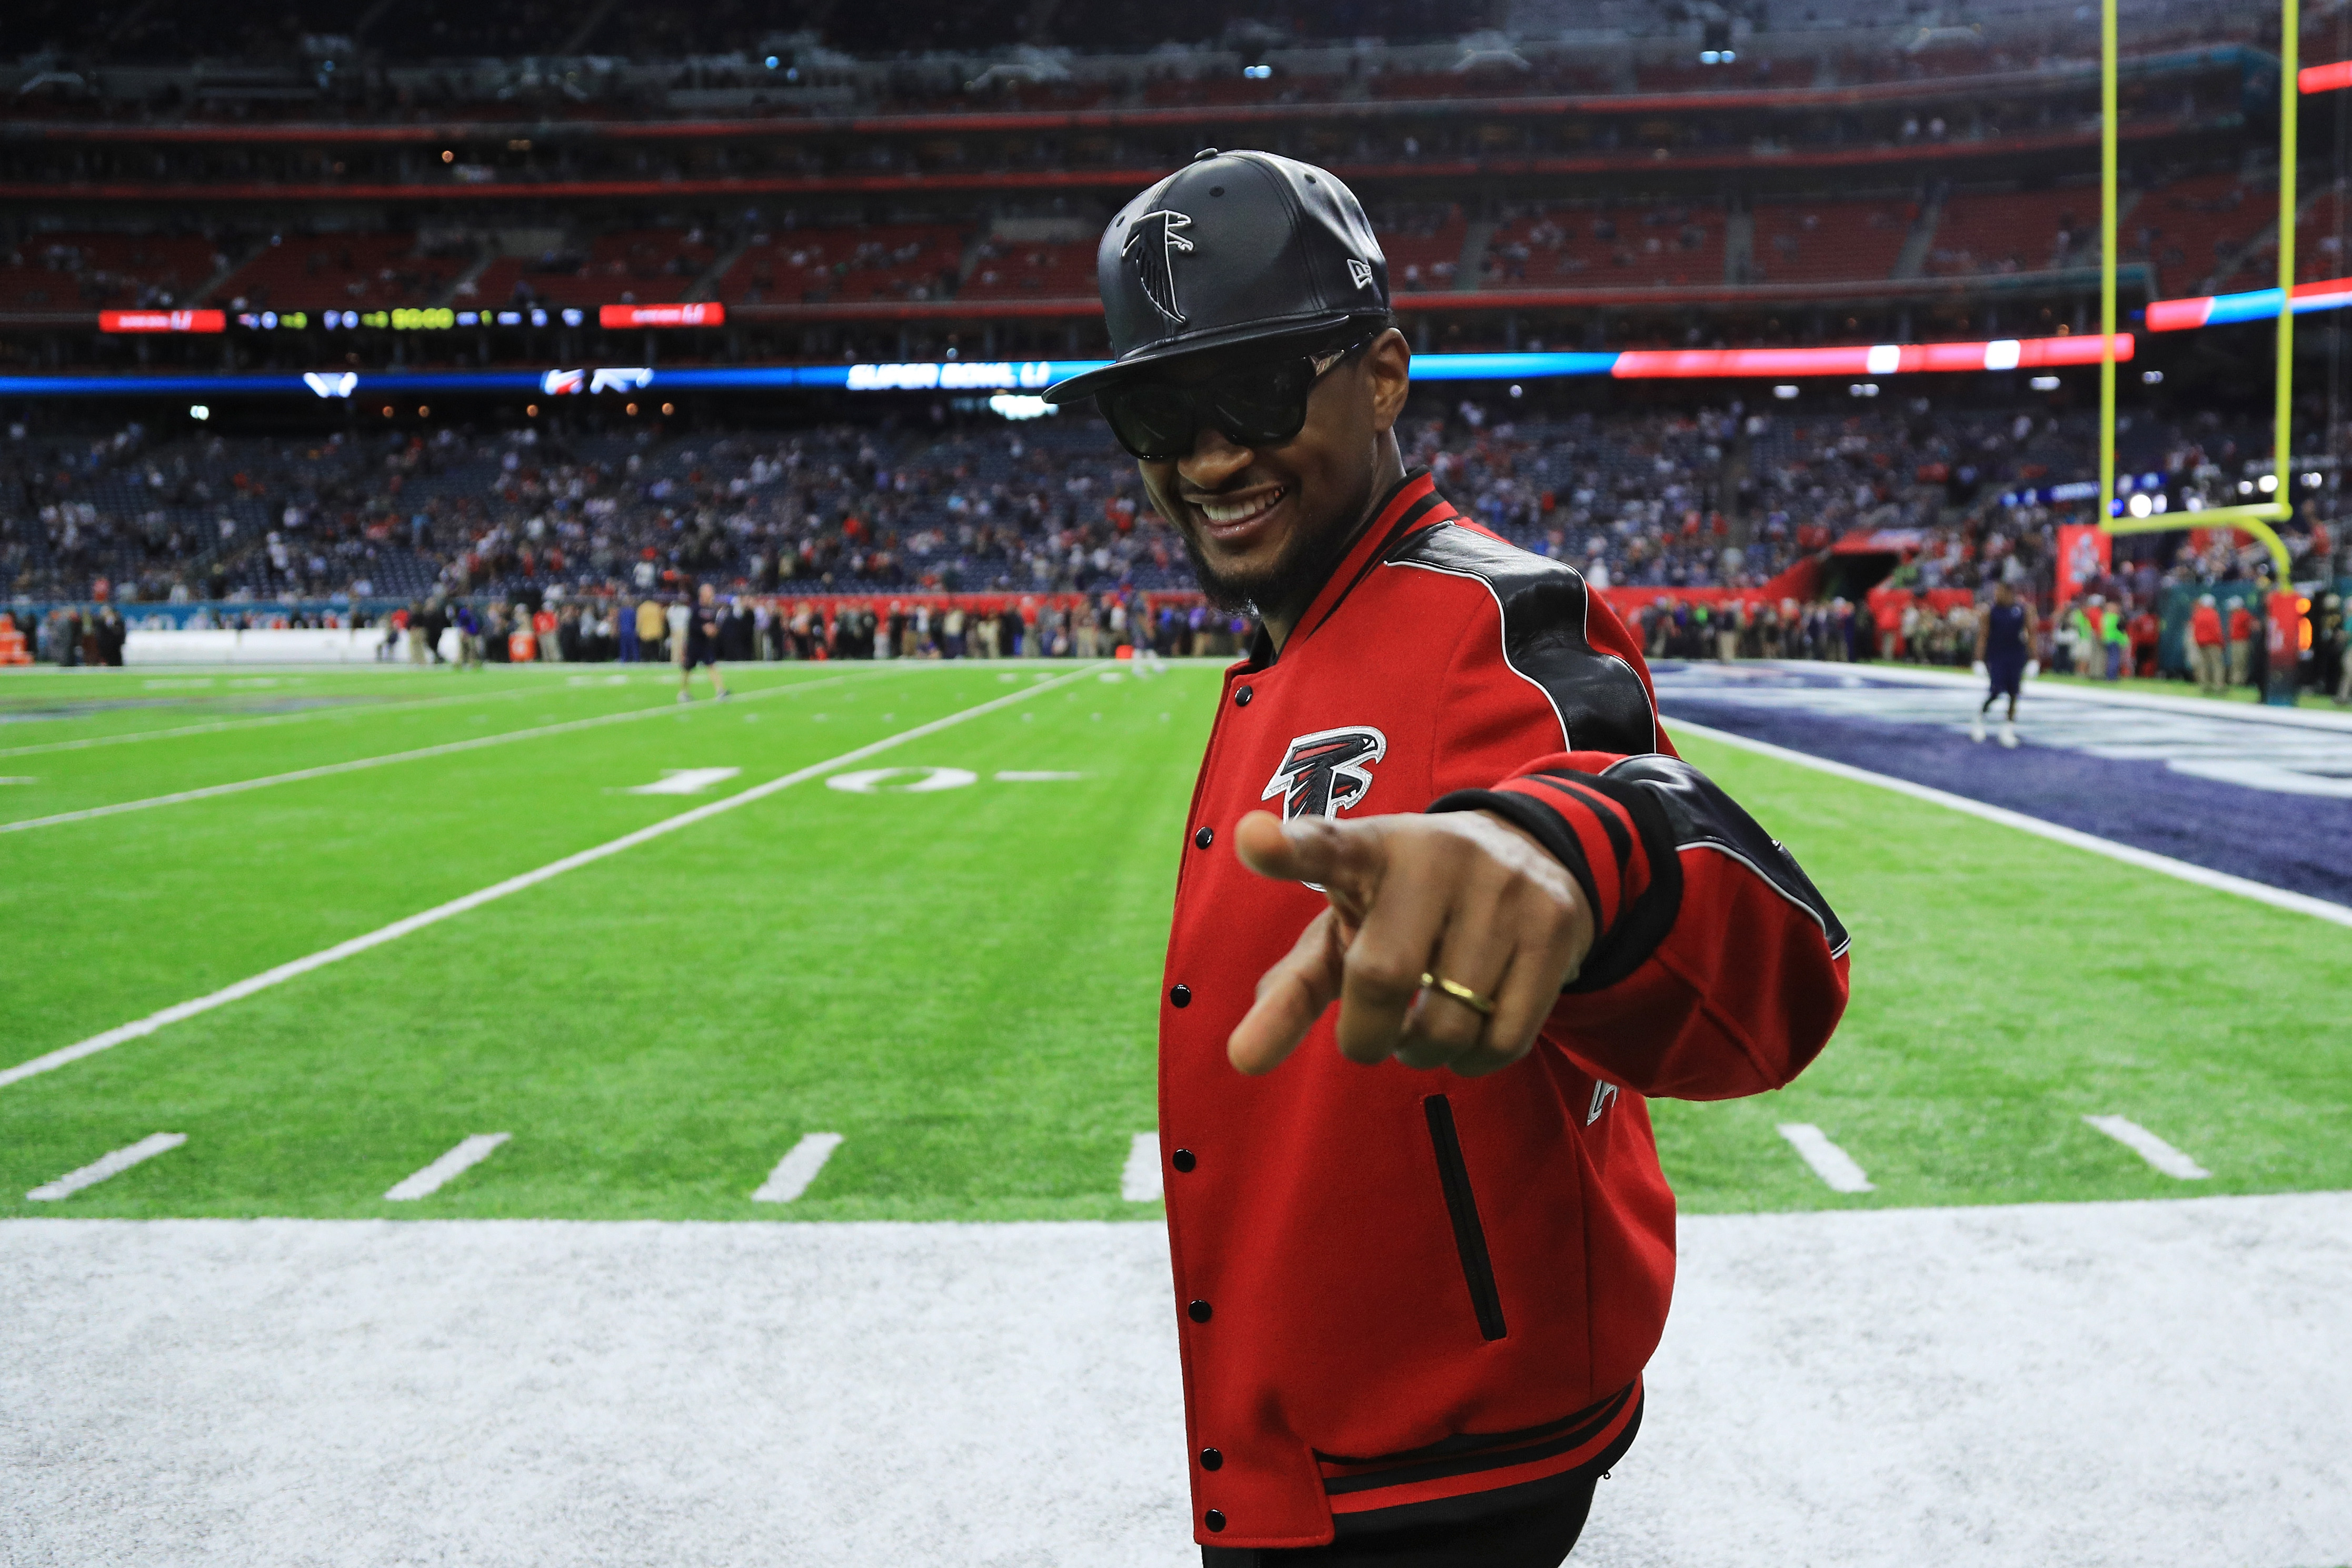 Artist Usher attends Super Bowl LI between the New England Patriots and the Atlanta Falcons at NRG Stadium in Houston, Texas, February 5, 2017. /CFP 